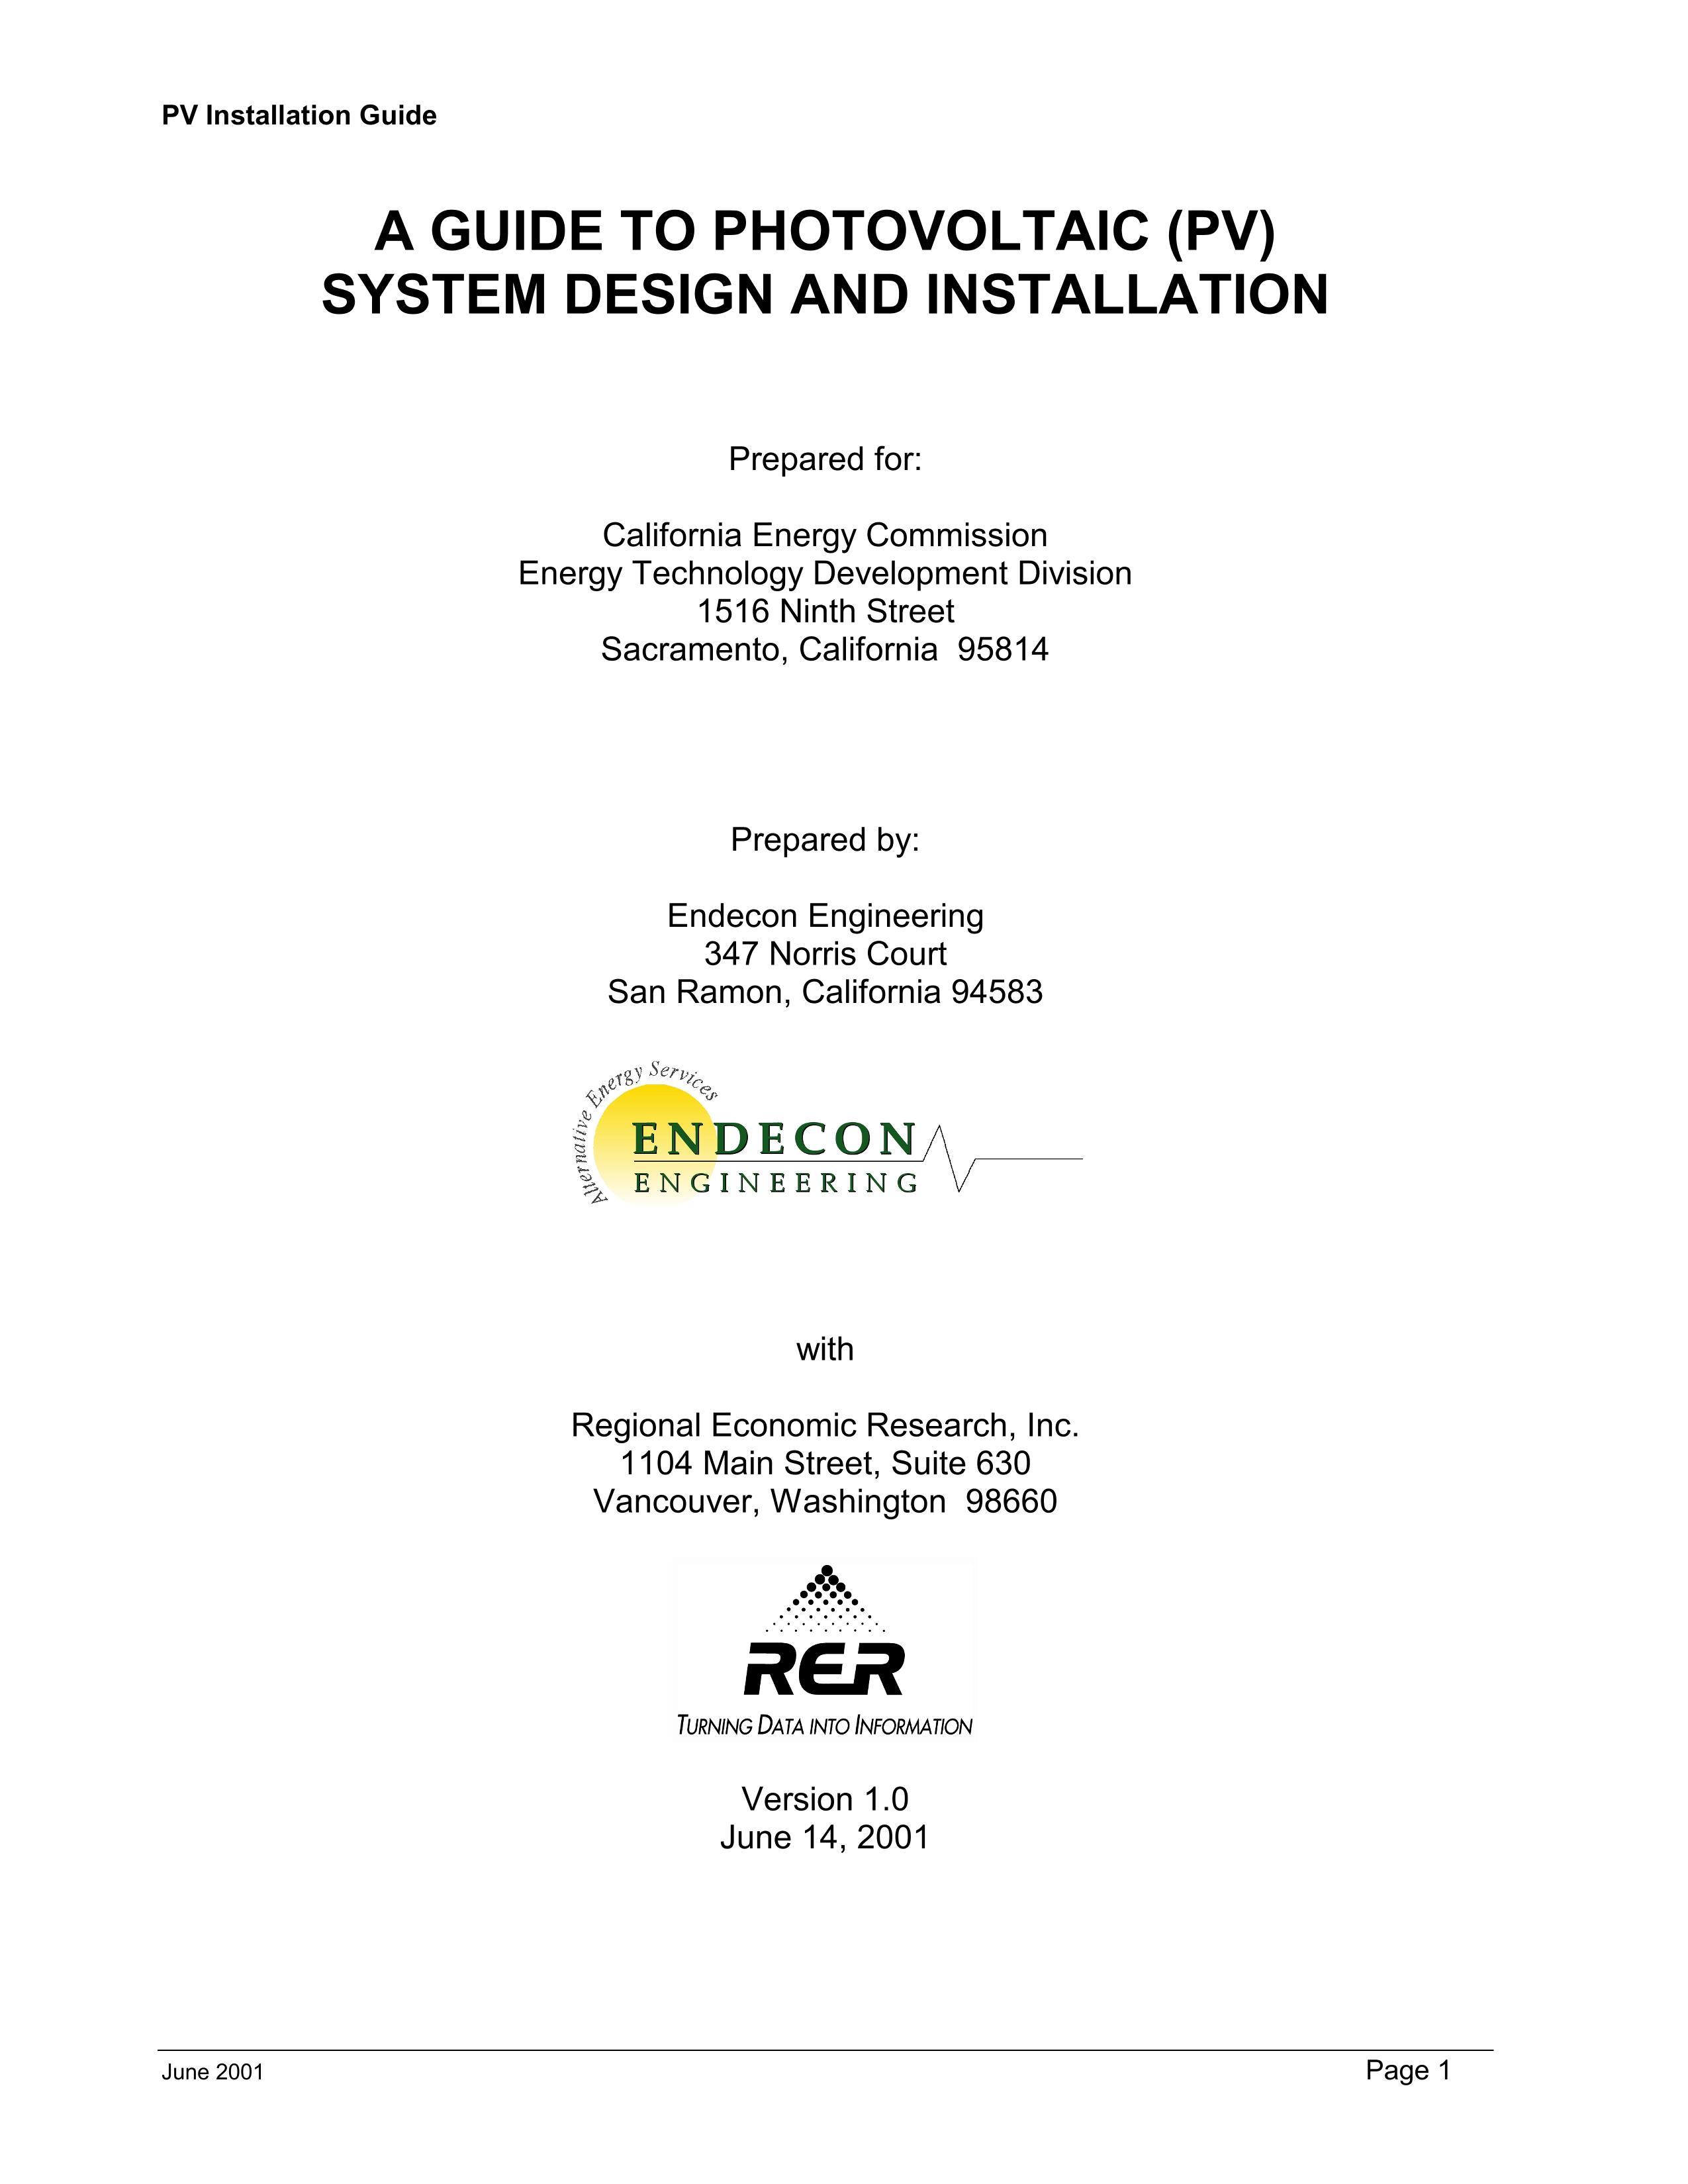 A Guide to Photovoltaic(PV) System Design and Installation.pdf2ҳ